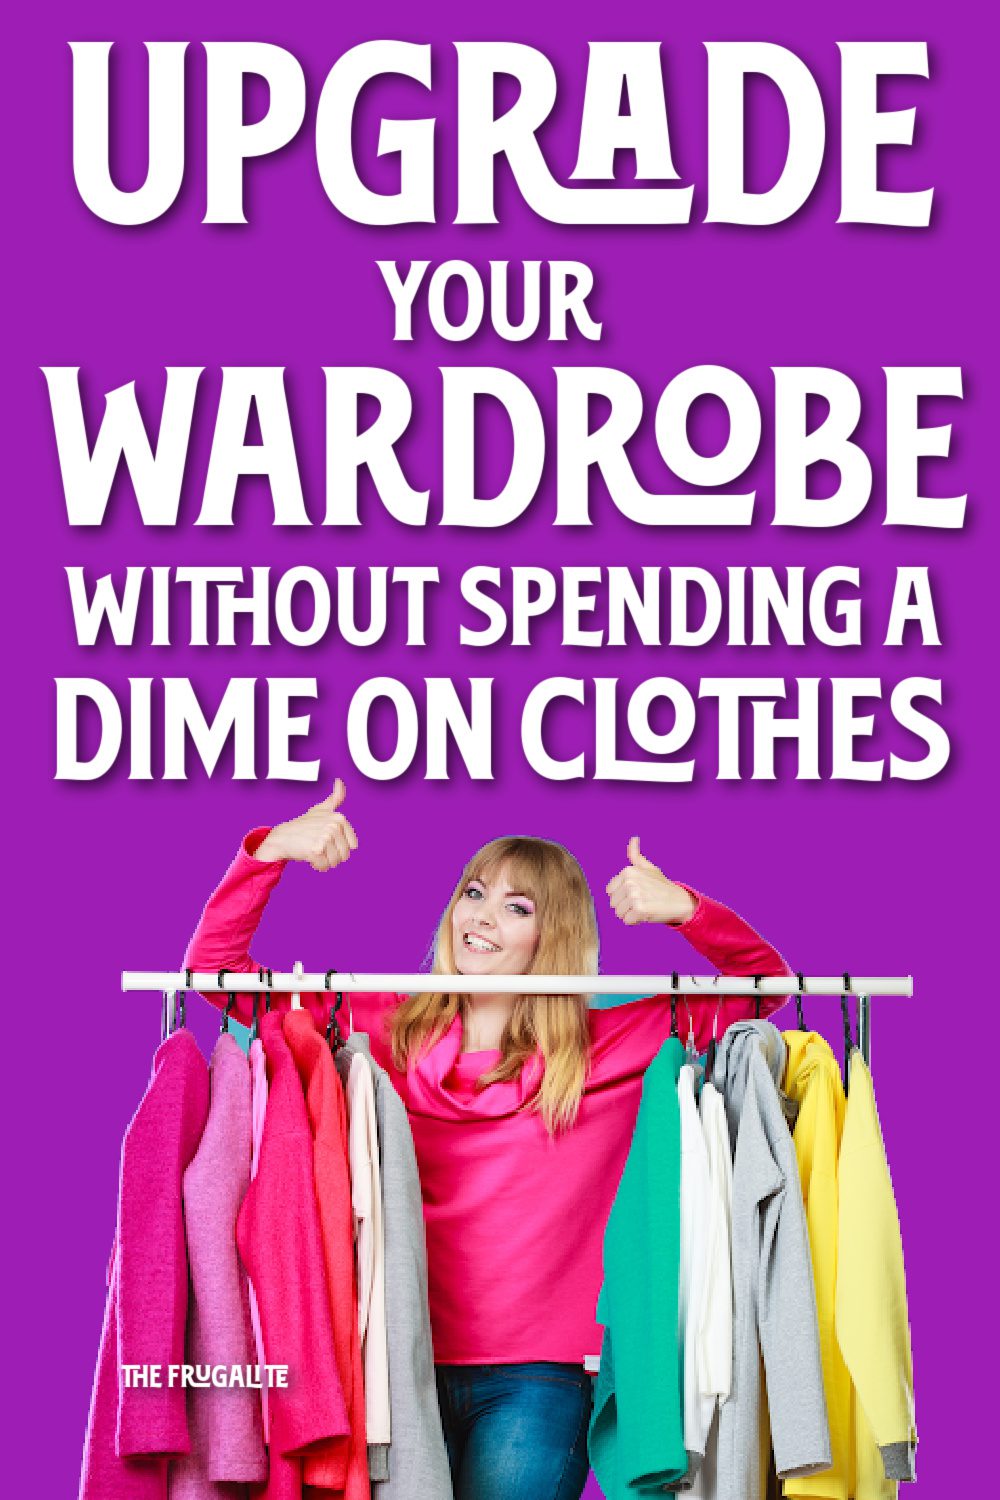 How to Upgrade Your Wardrobe Without Spending a Dime on Clothes